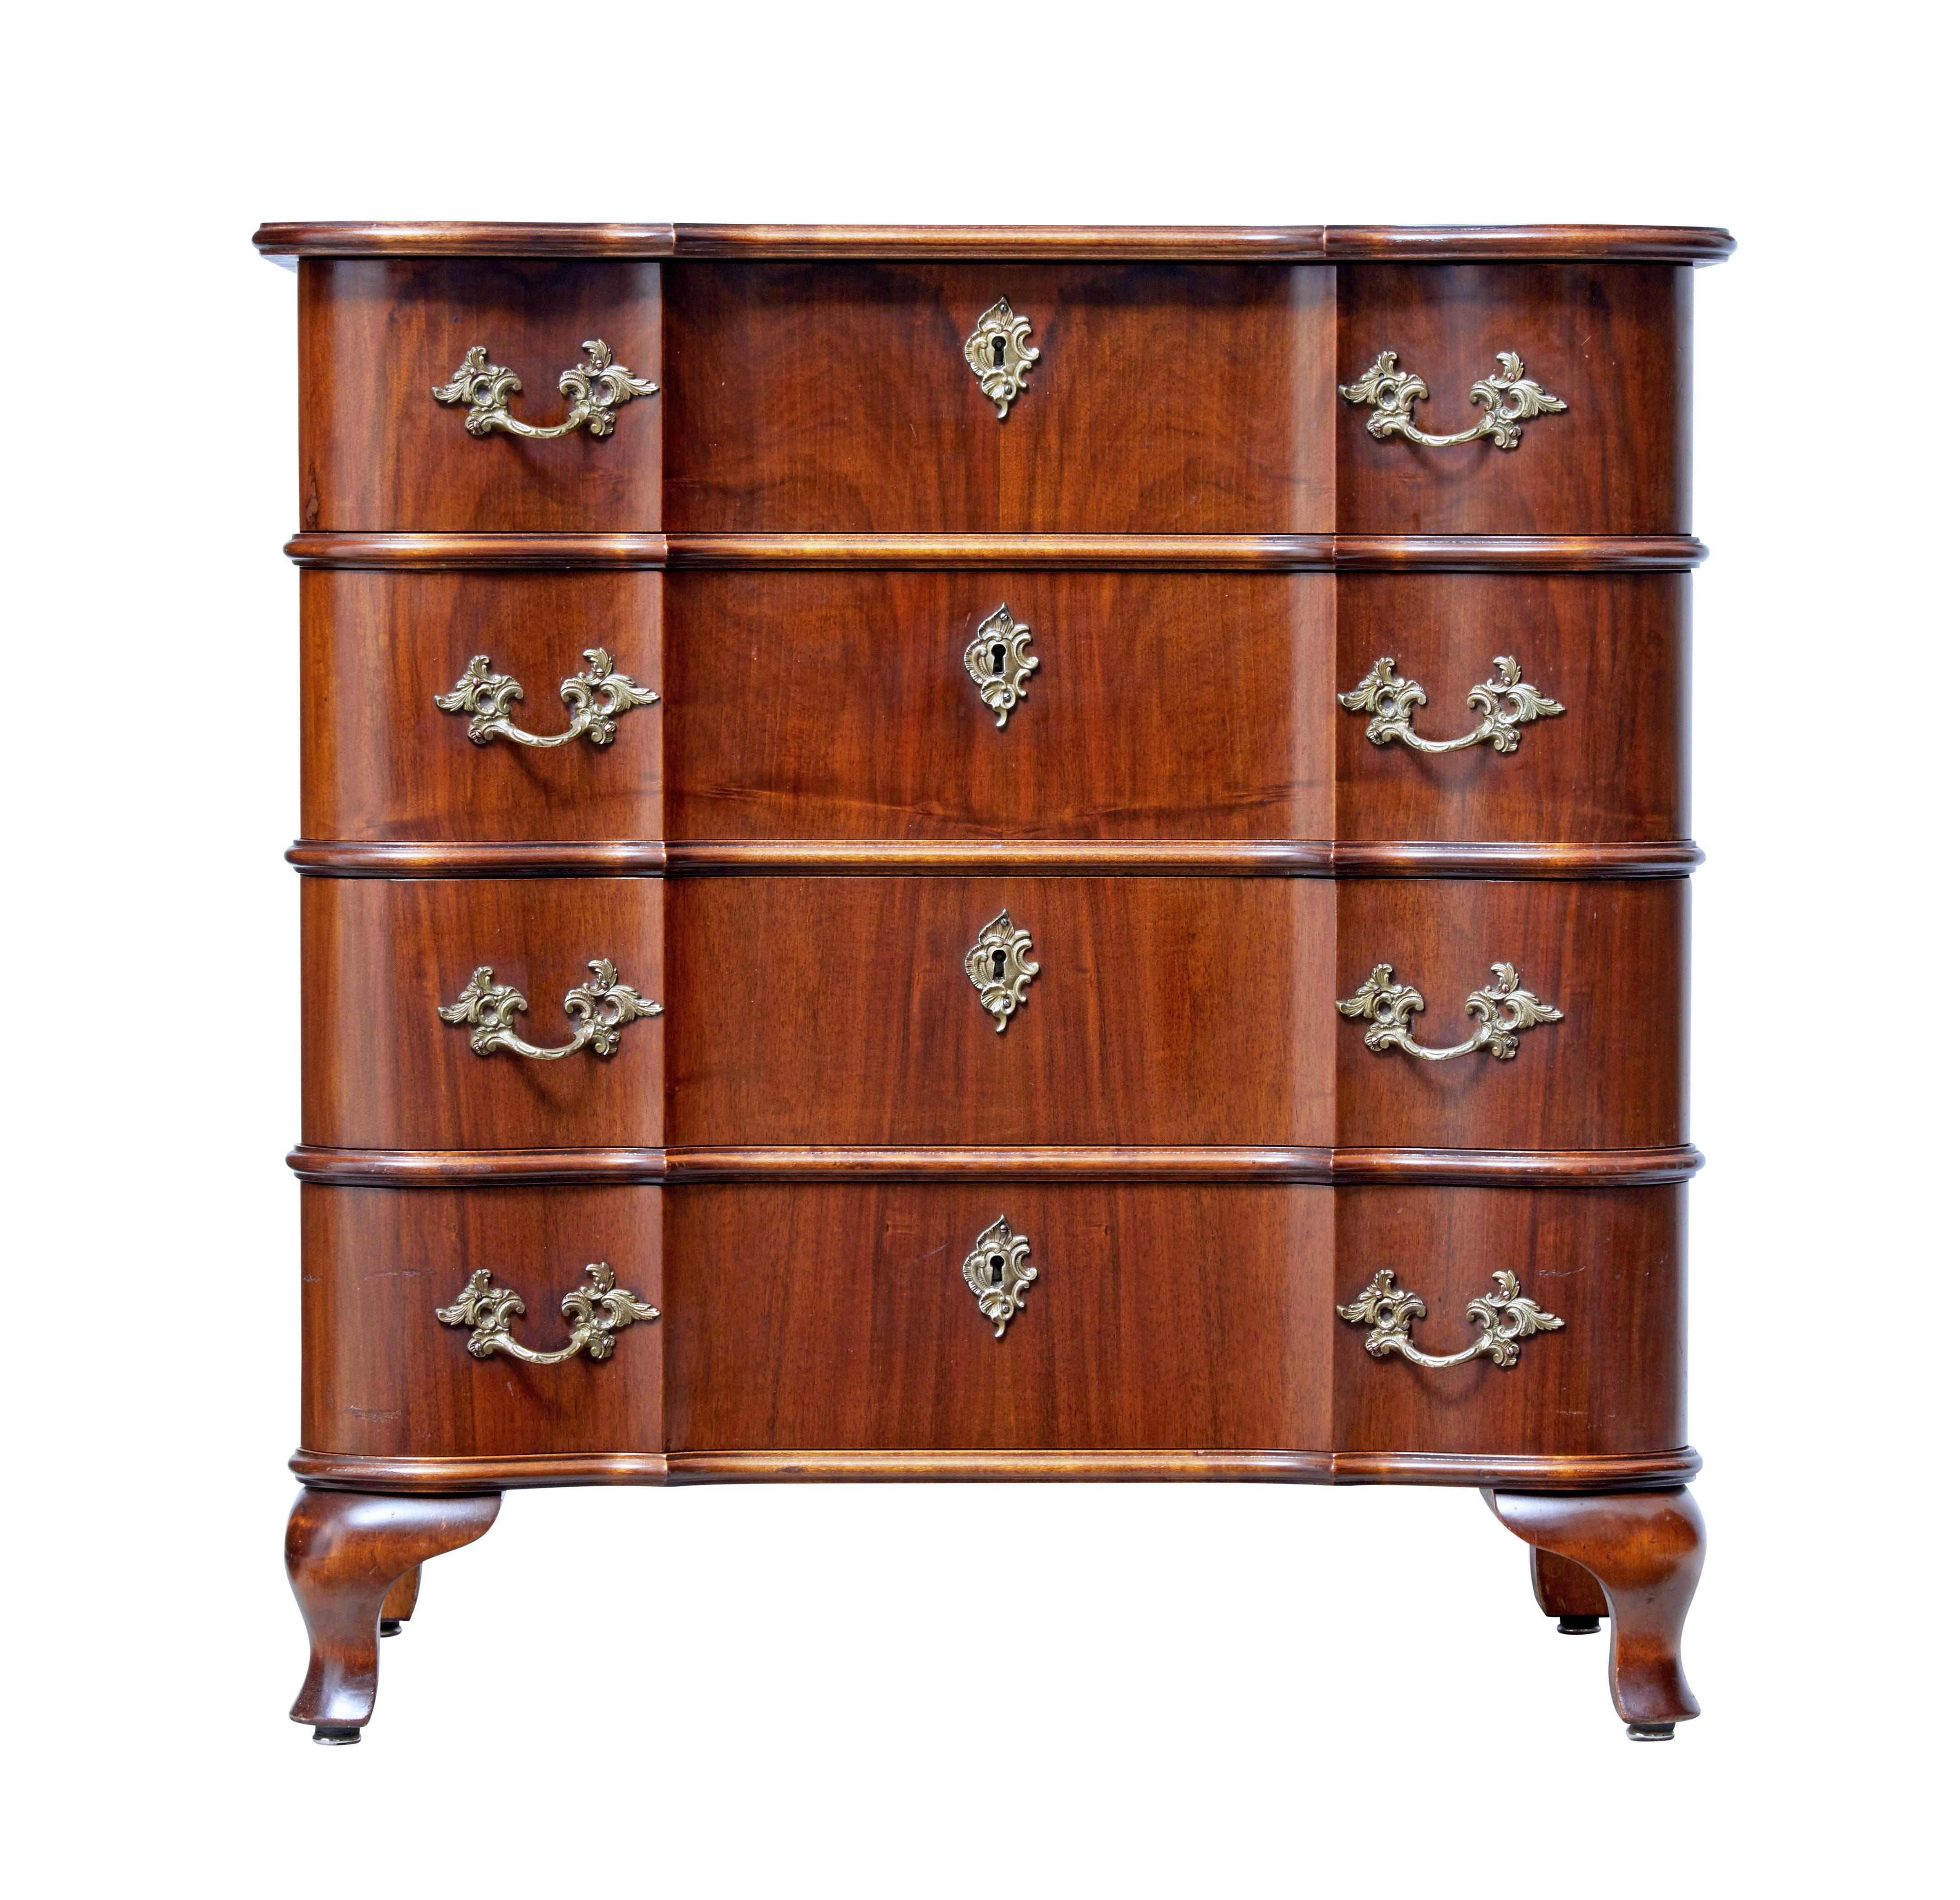 Mid-20th century baroque inspired walnut chest of drawers, circa 1950.

Elegant serpentine shaped walnut commode of petit proportions.

4 drawer chest with shaped drawer fronts and top. Fitted with ornate brass handles and escutheon